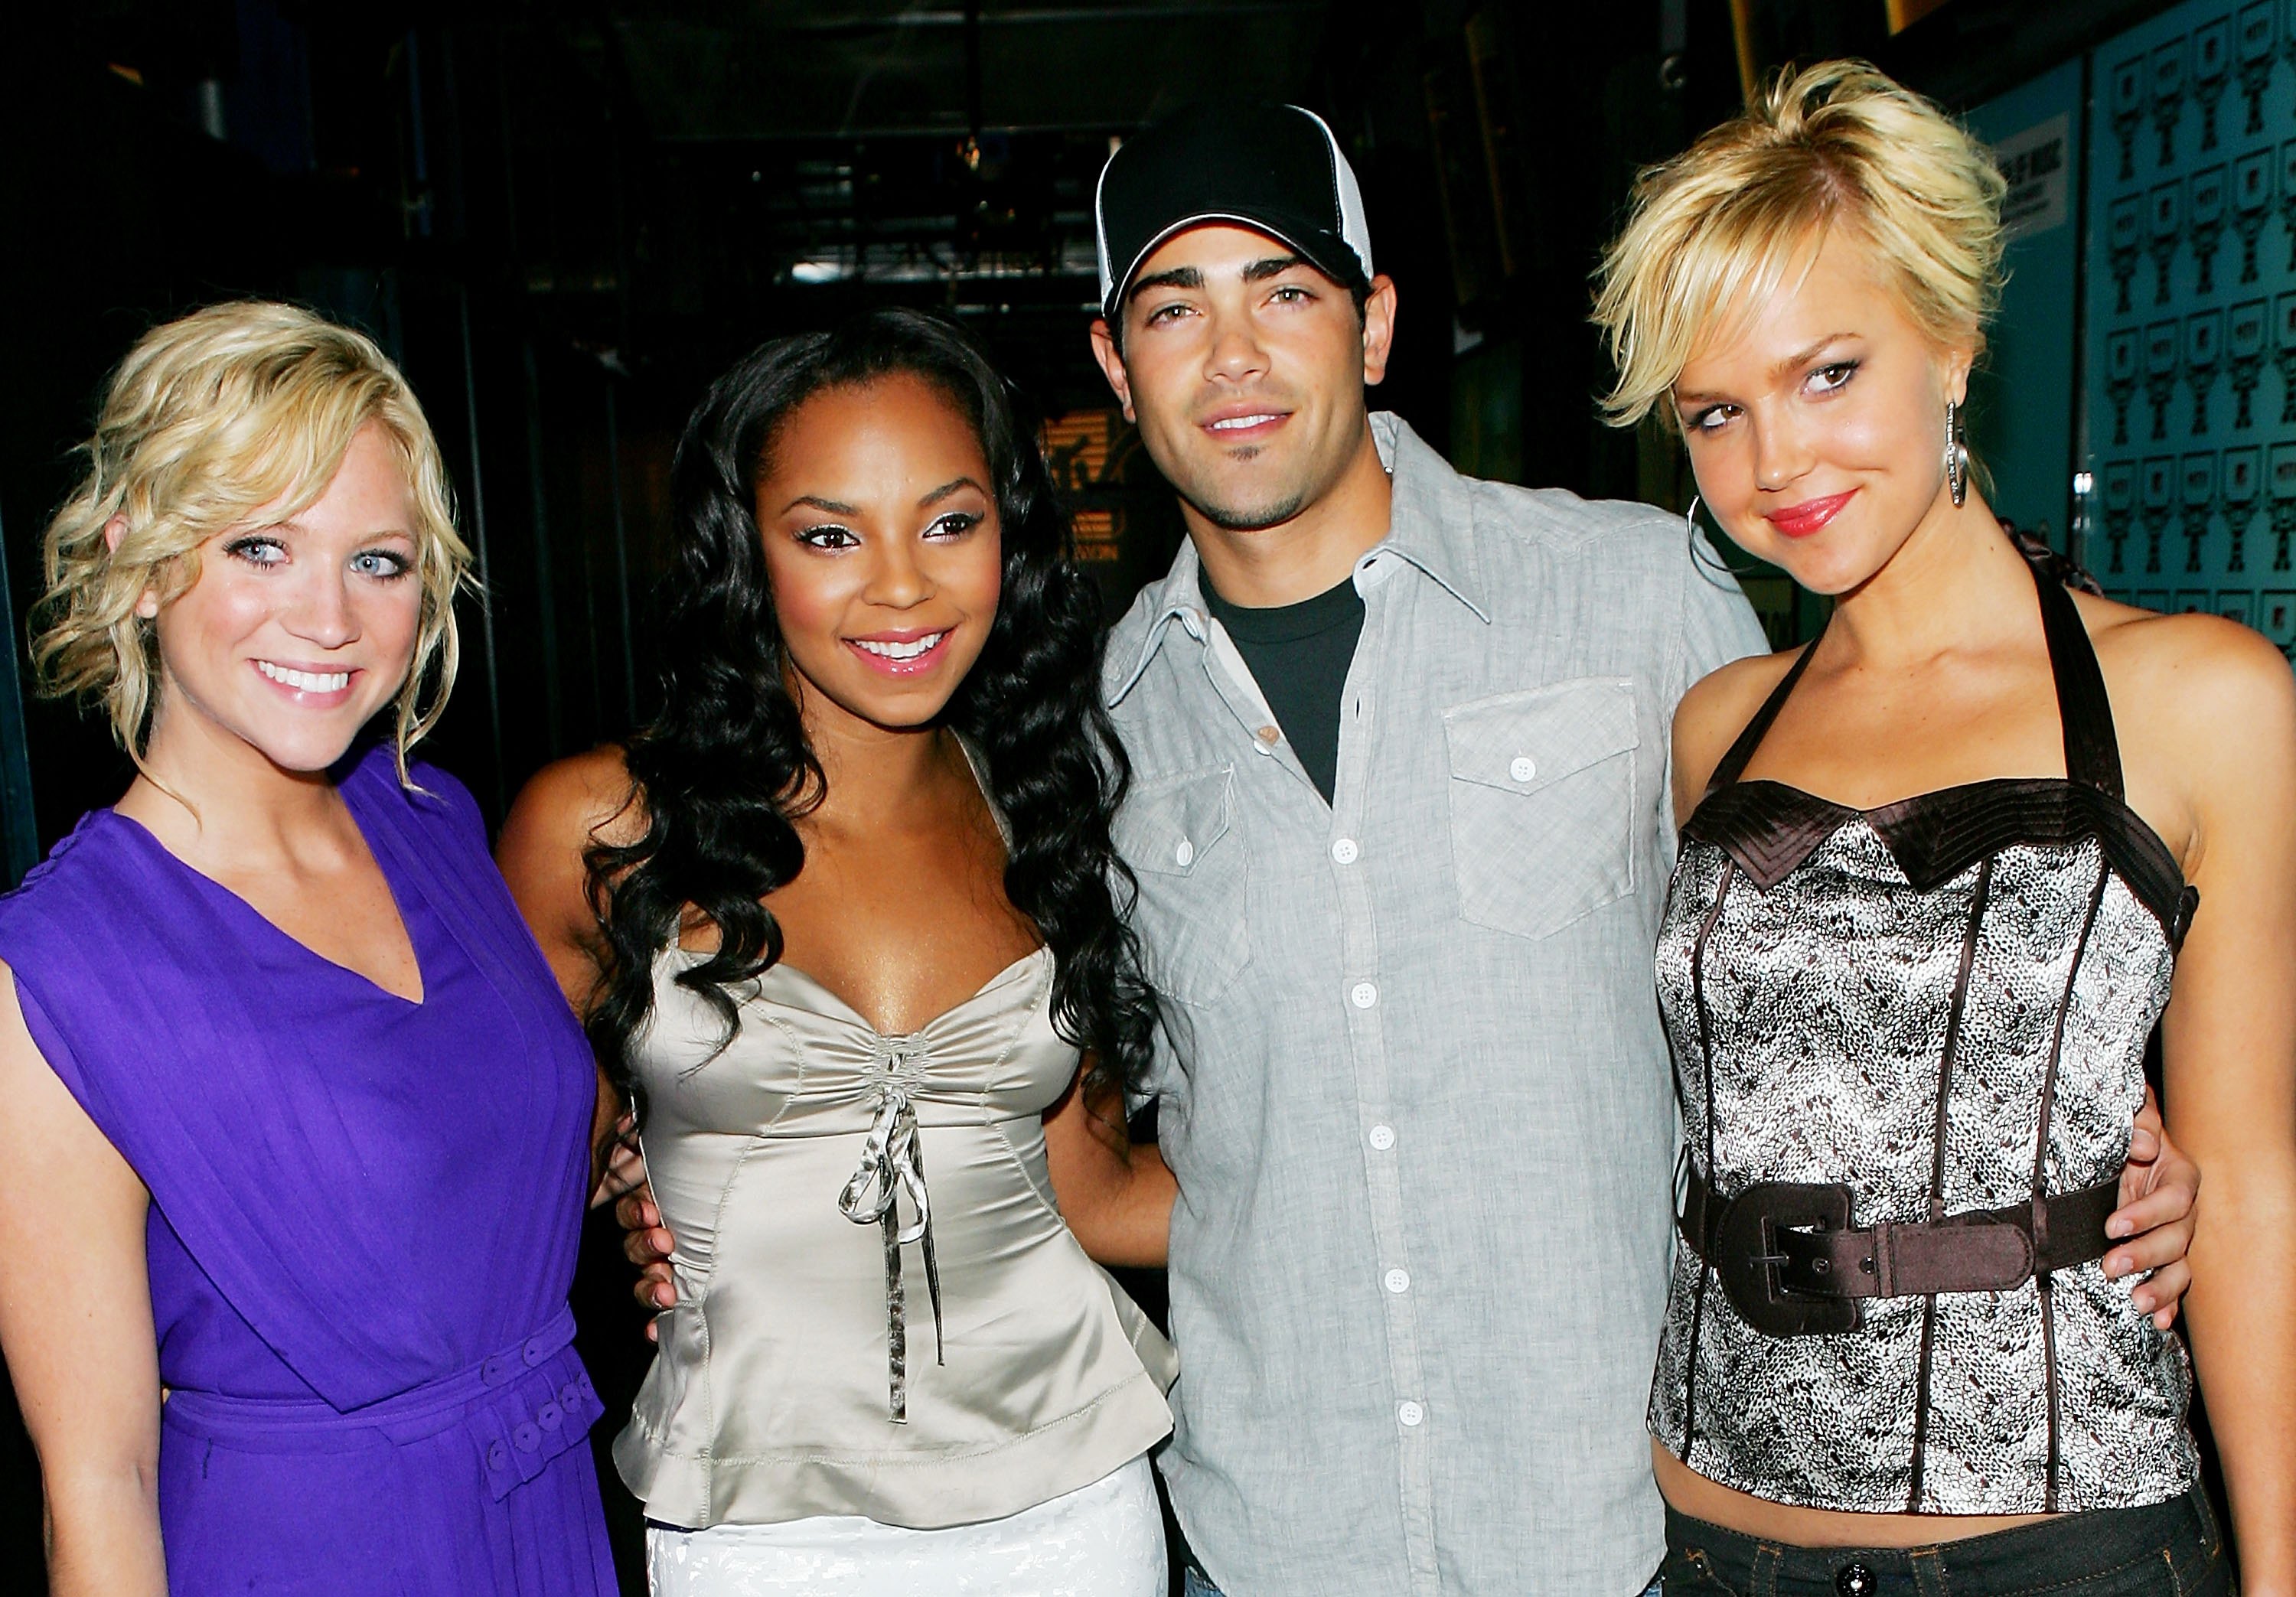 (L-R) Brittany Snow, Ashanti, Jesse Metcalfe and Arielle Kebbel pose together backstage after an appearance on MTV's "Total Request Live" to promote "John Tucker Must Die" at MTV Studios July 27, 2006, in New York City. | Source: Getty Images